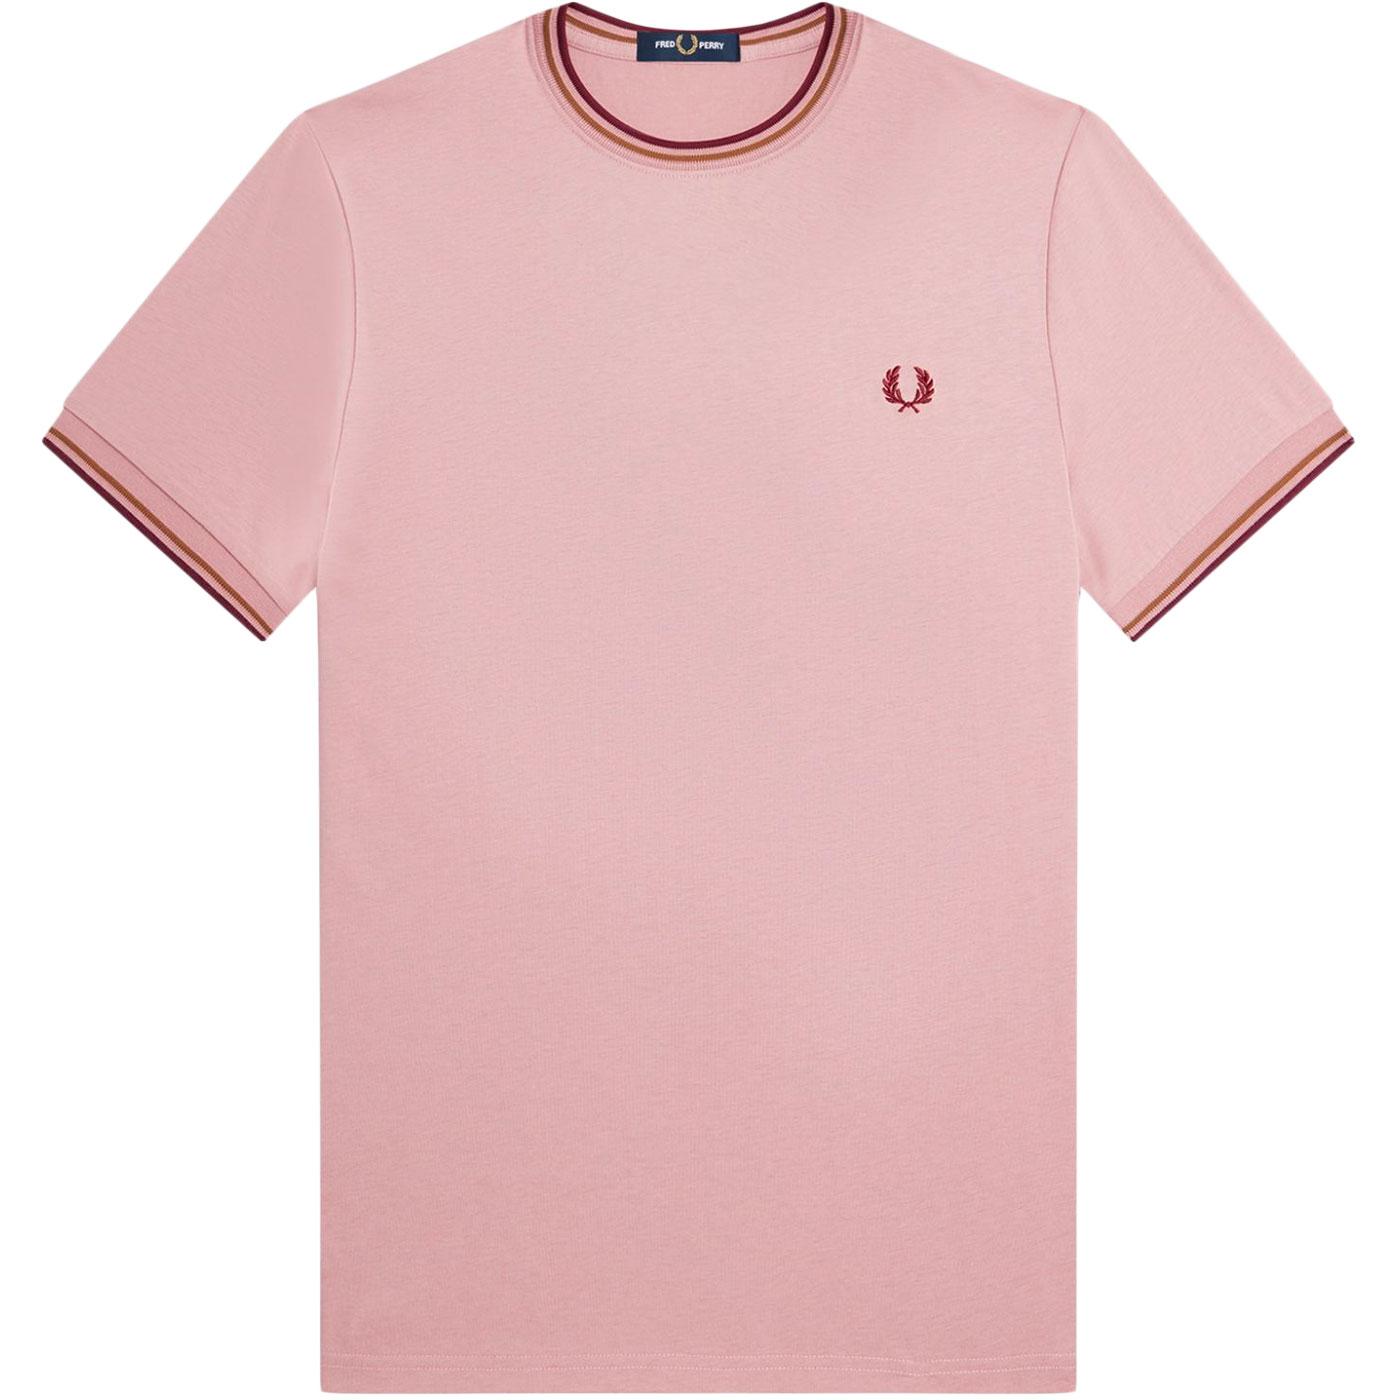 FRED PERRY M1588 Mod Twin Tipped T-Shirt - Rose